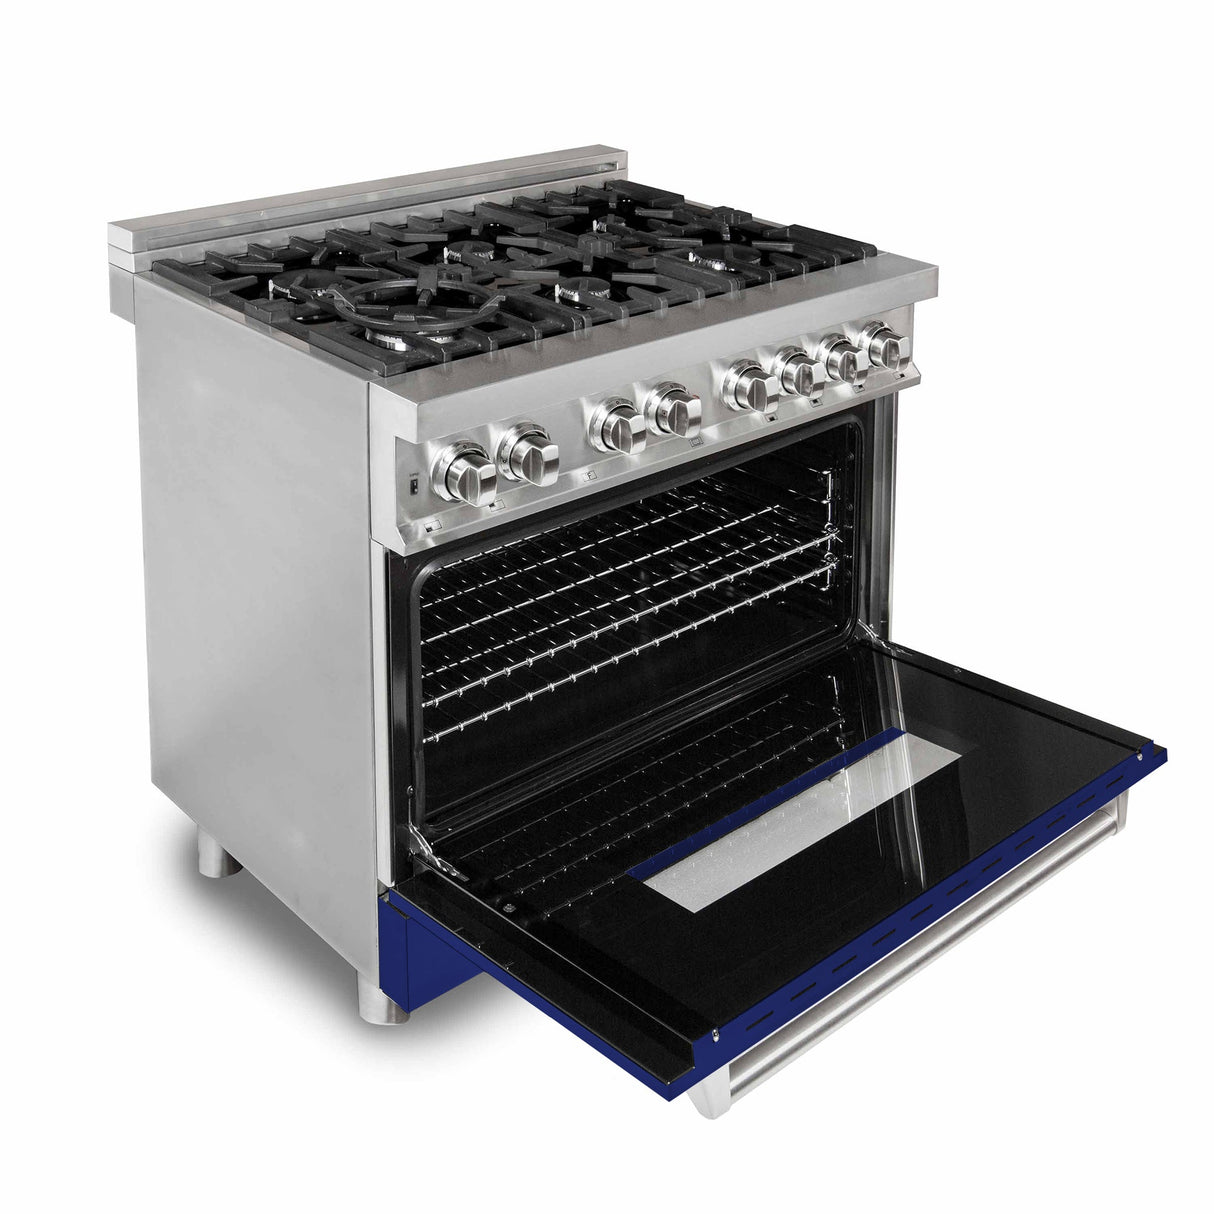 ZLINE 36 in. Dual Fuel Range with Gas Stove and Electric Oven in Stainless Steel with Blue Gloss Door (RA-BG-36)